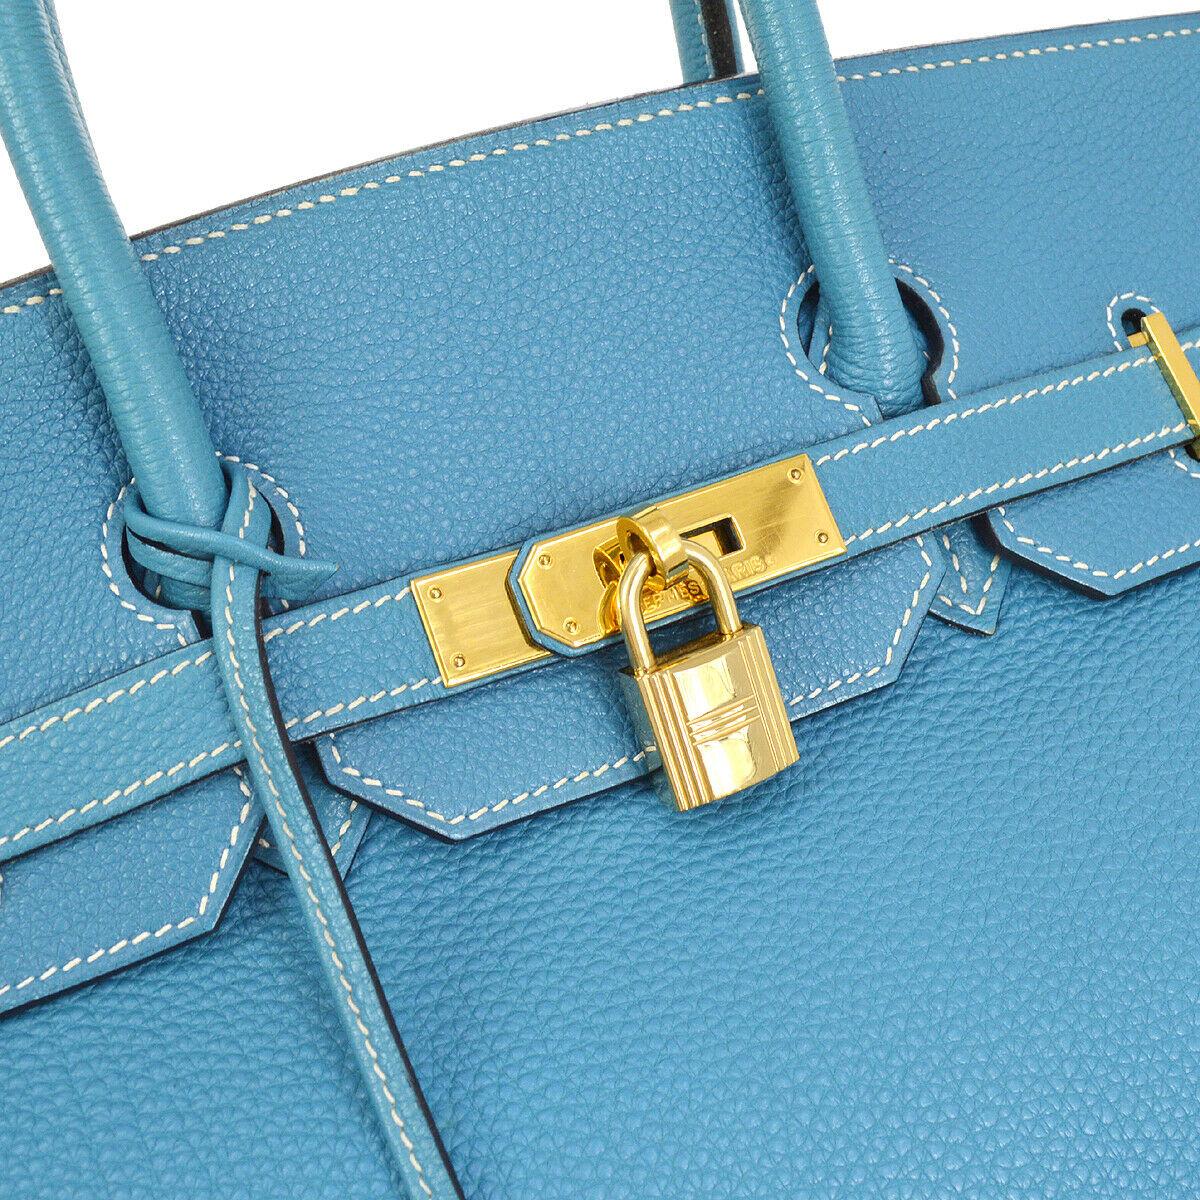 The Hermes Birkin That Will Turn Heads.

Add a pop of luxurious color to your life with this richly beautiful Hermes 35 Tote bag.  Handcrafted of supple Togo leather and enriched with shiny gold tone hardware, it is the ultimate status symbol in a